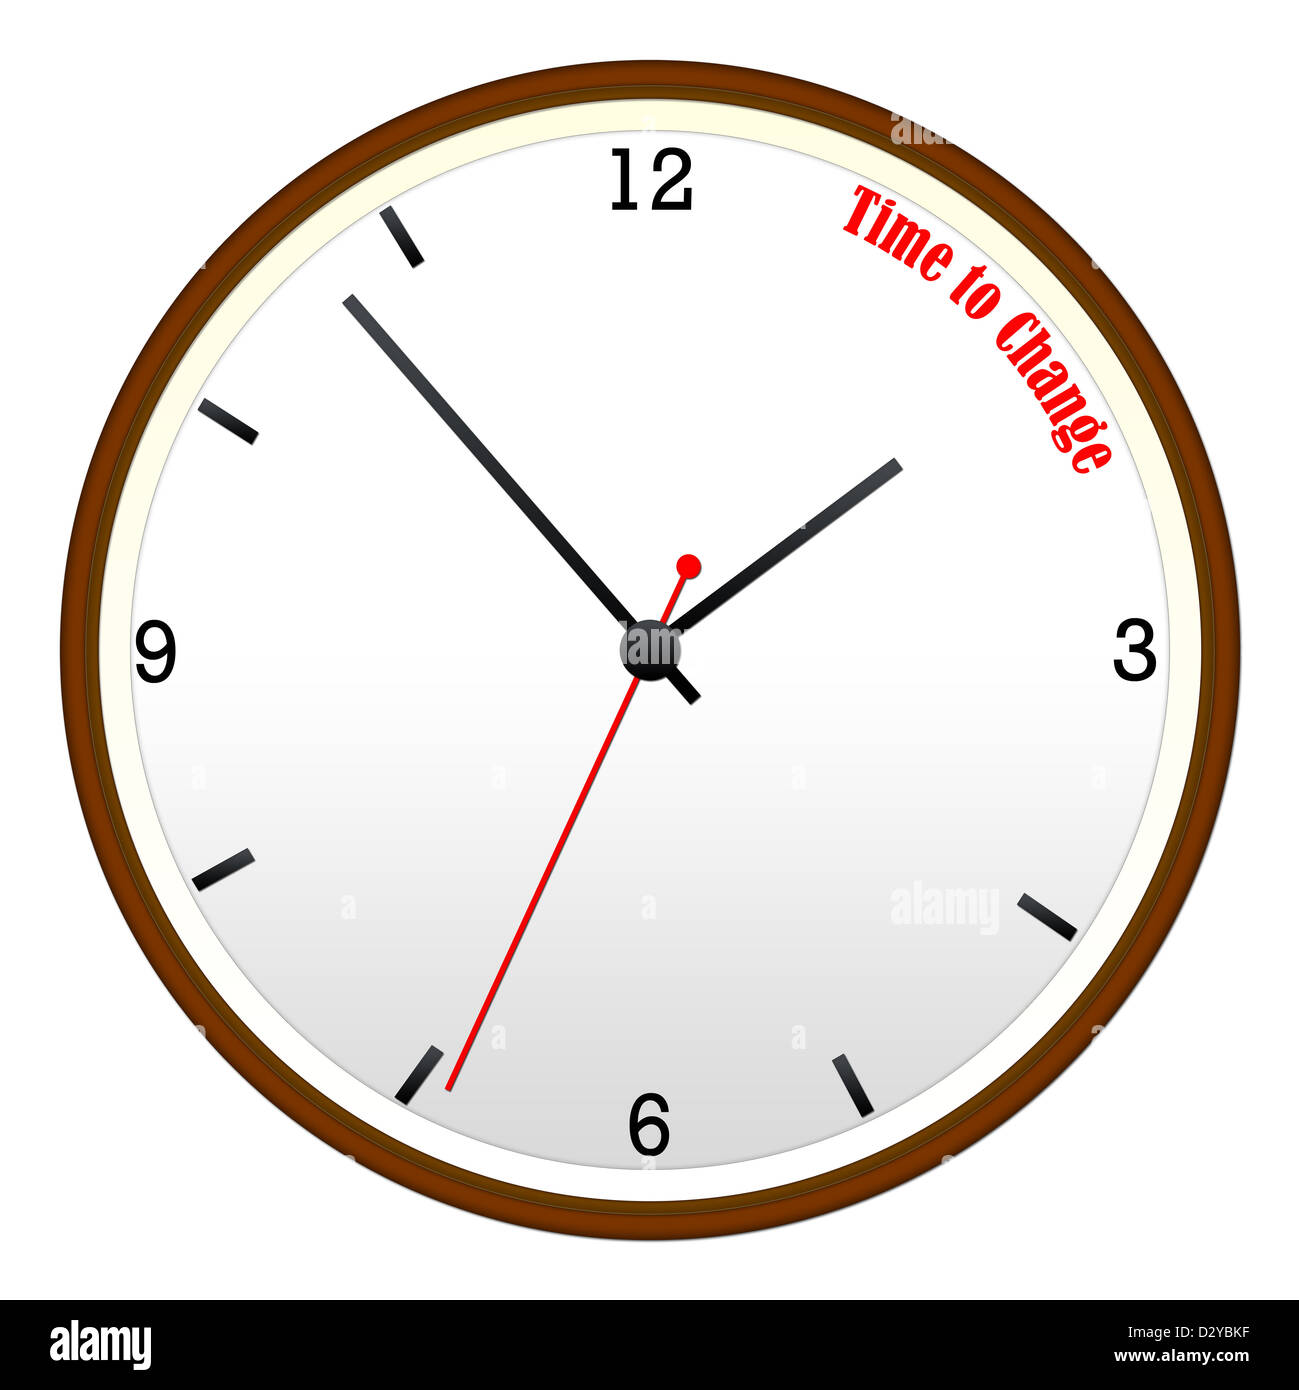 Time to Change concept on a Wooden Wall Clock with hour, minutes, and second hand. Stock Photo